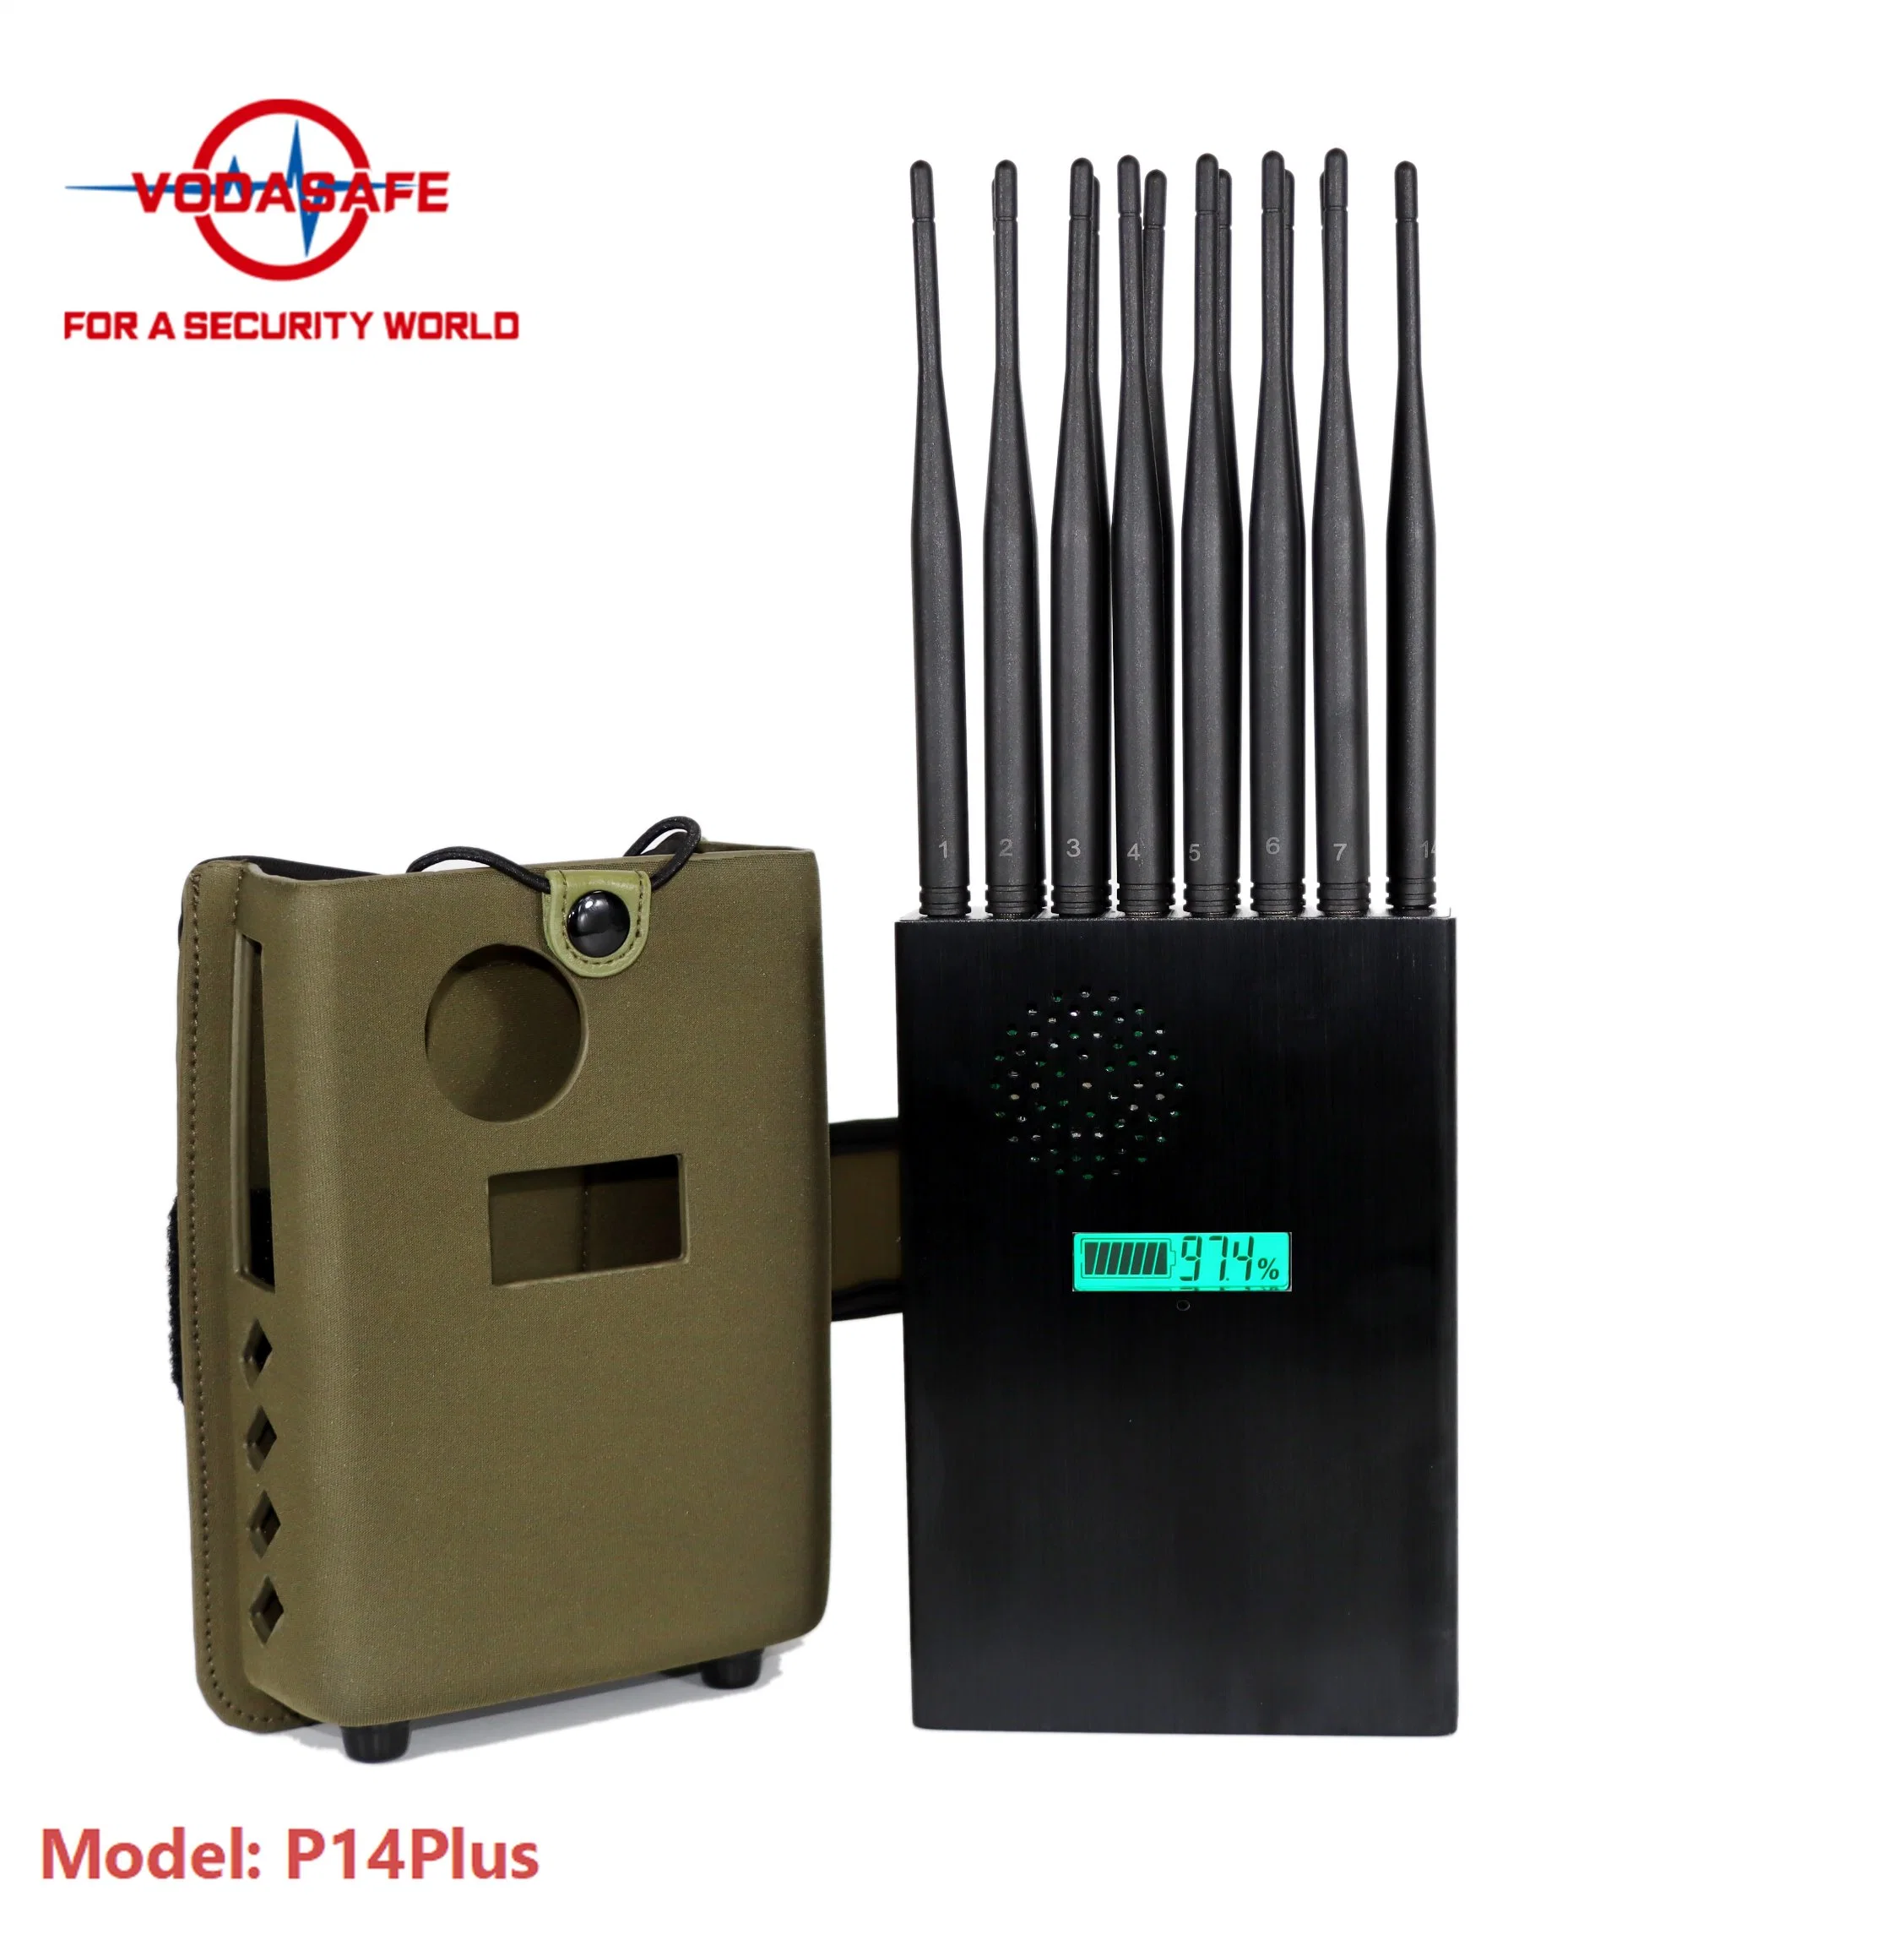 Handheld Using High Power Signal Jammer Stop GPS Tracking Devices